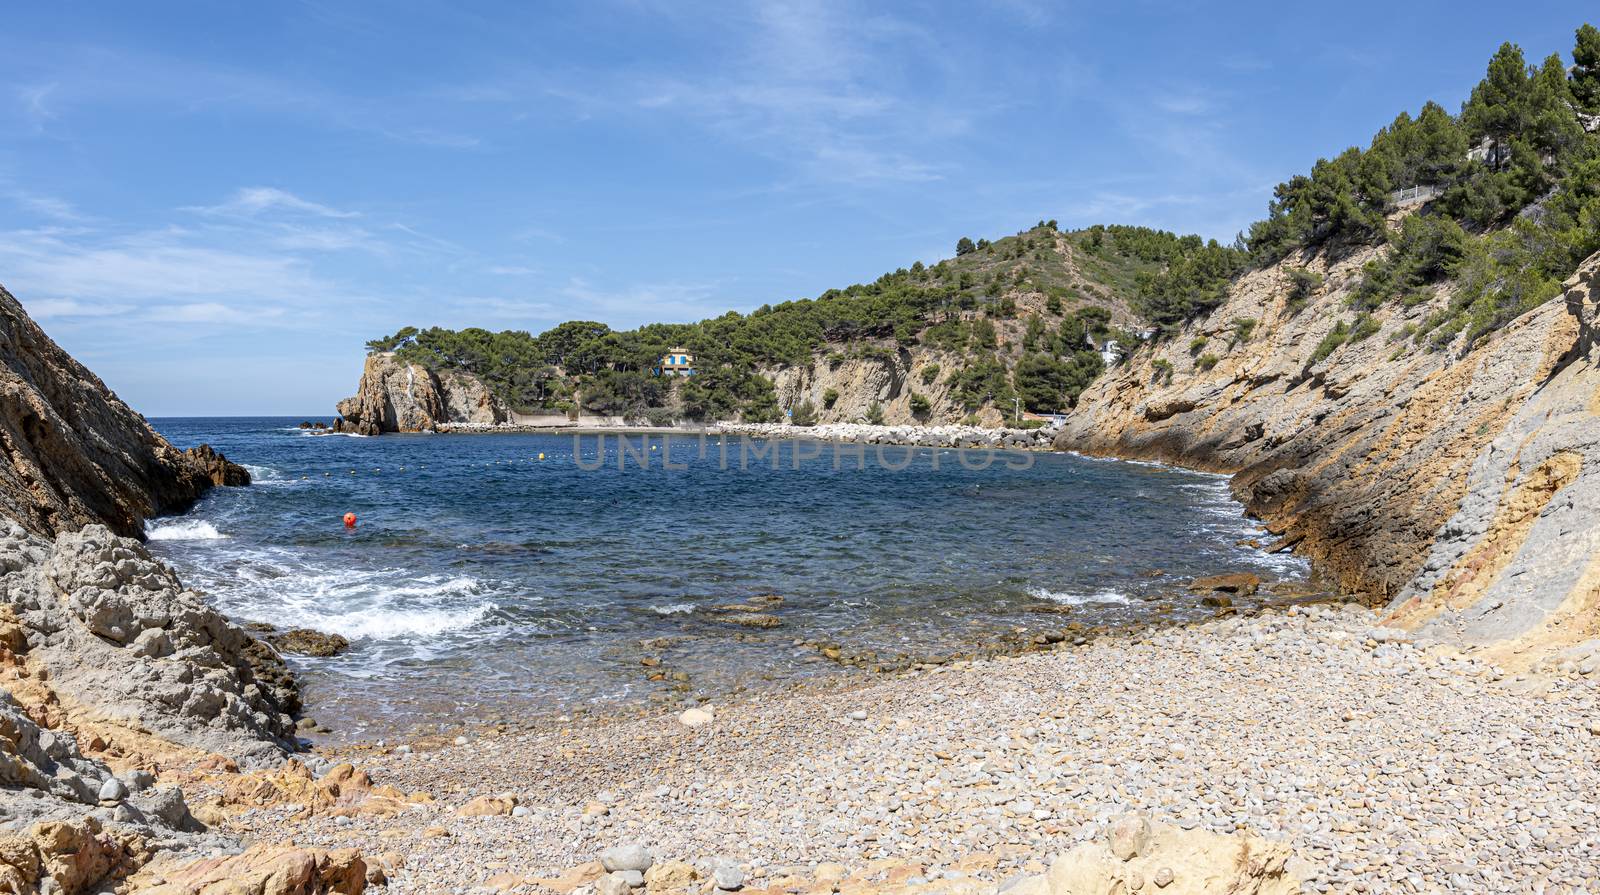 Bay and pebble beach of  the iconic Calanque of Figuieres, creek of Figuieres and Figuières Cove in Méjean, South of France, Europe